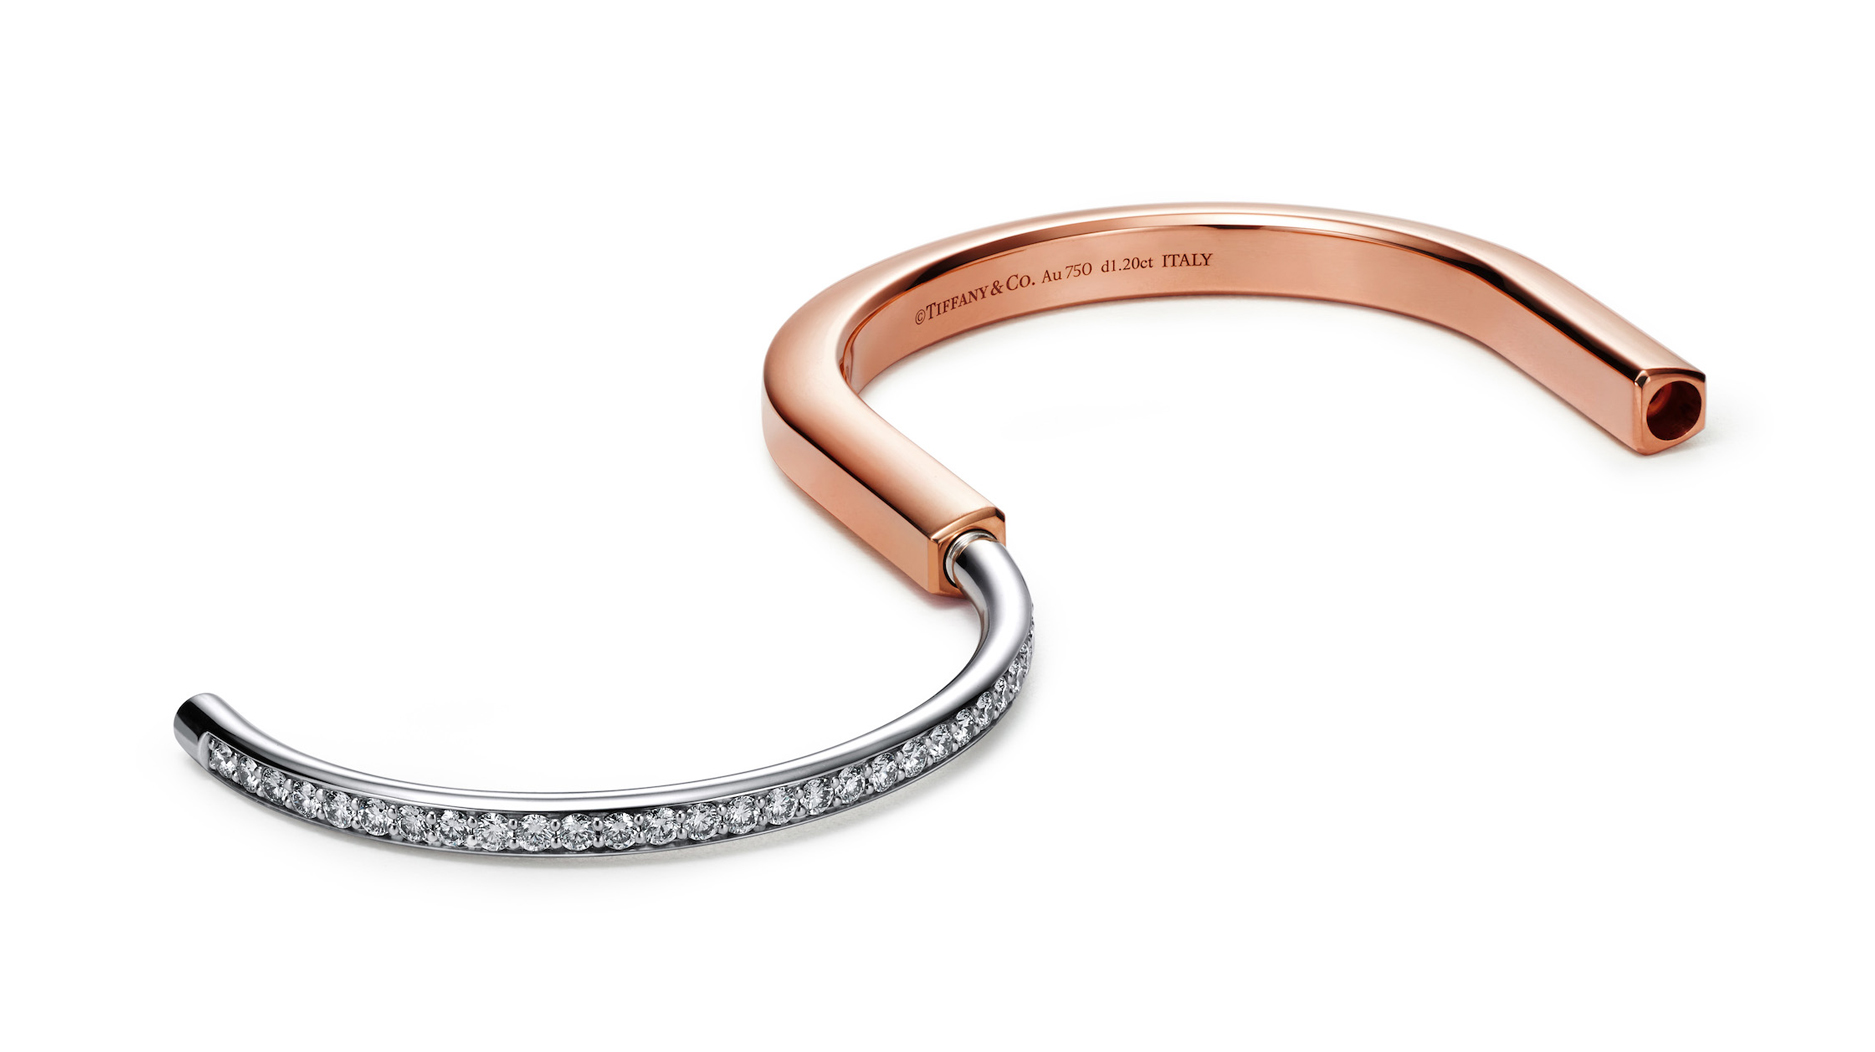 8 Gold Bracelet Designs Your Partner Can Buy For Your Anniversary Gift